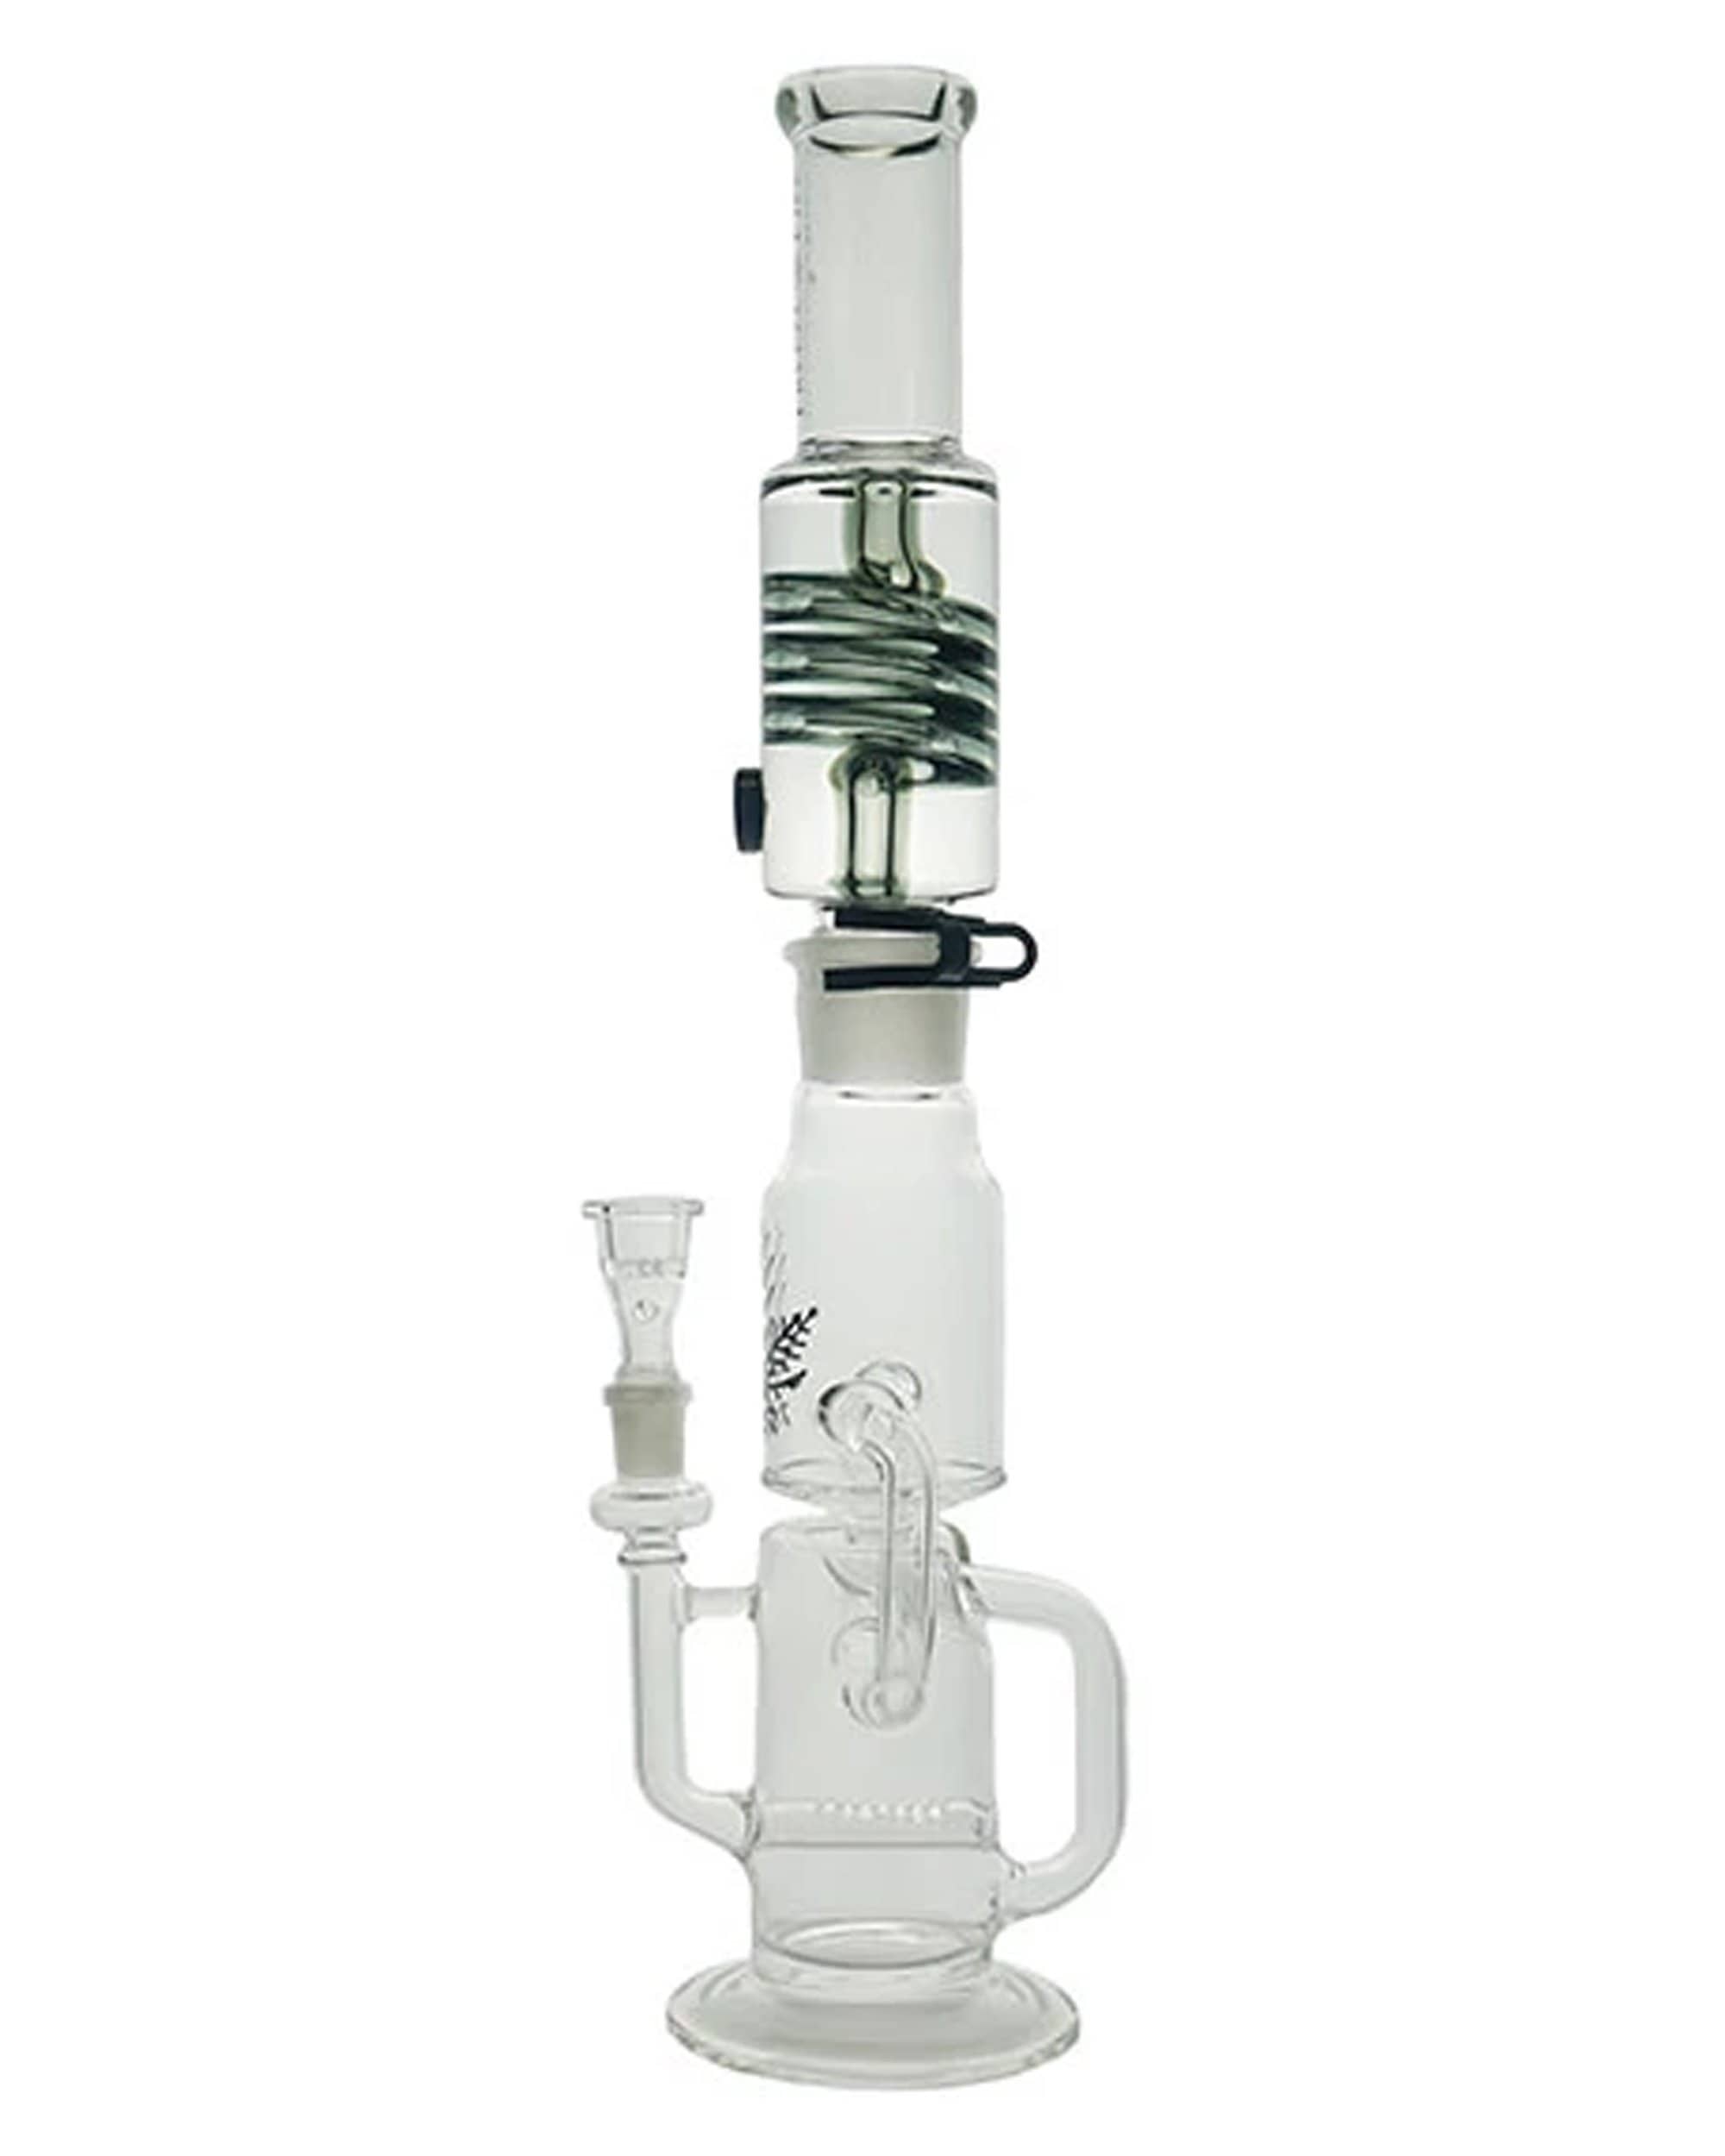 The Freeze Pipe Recycler Bong